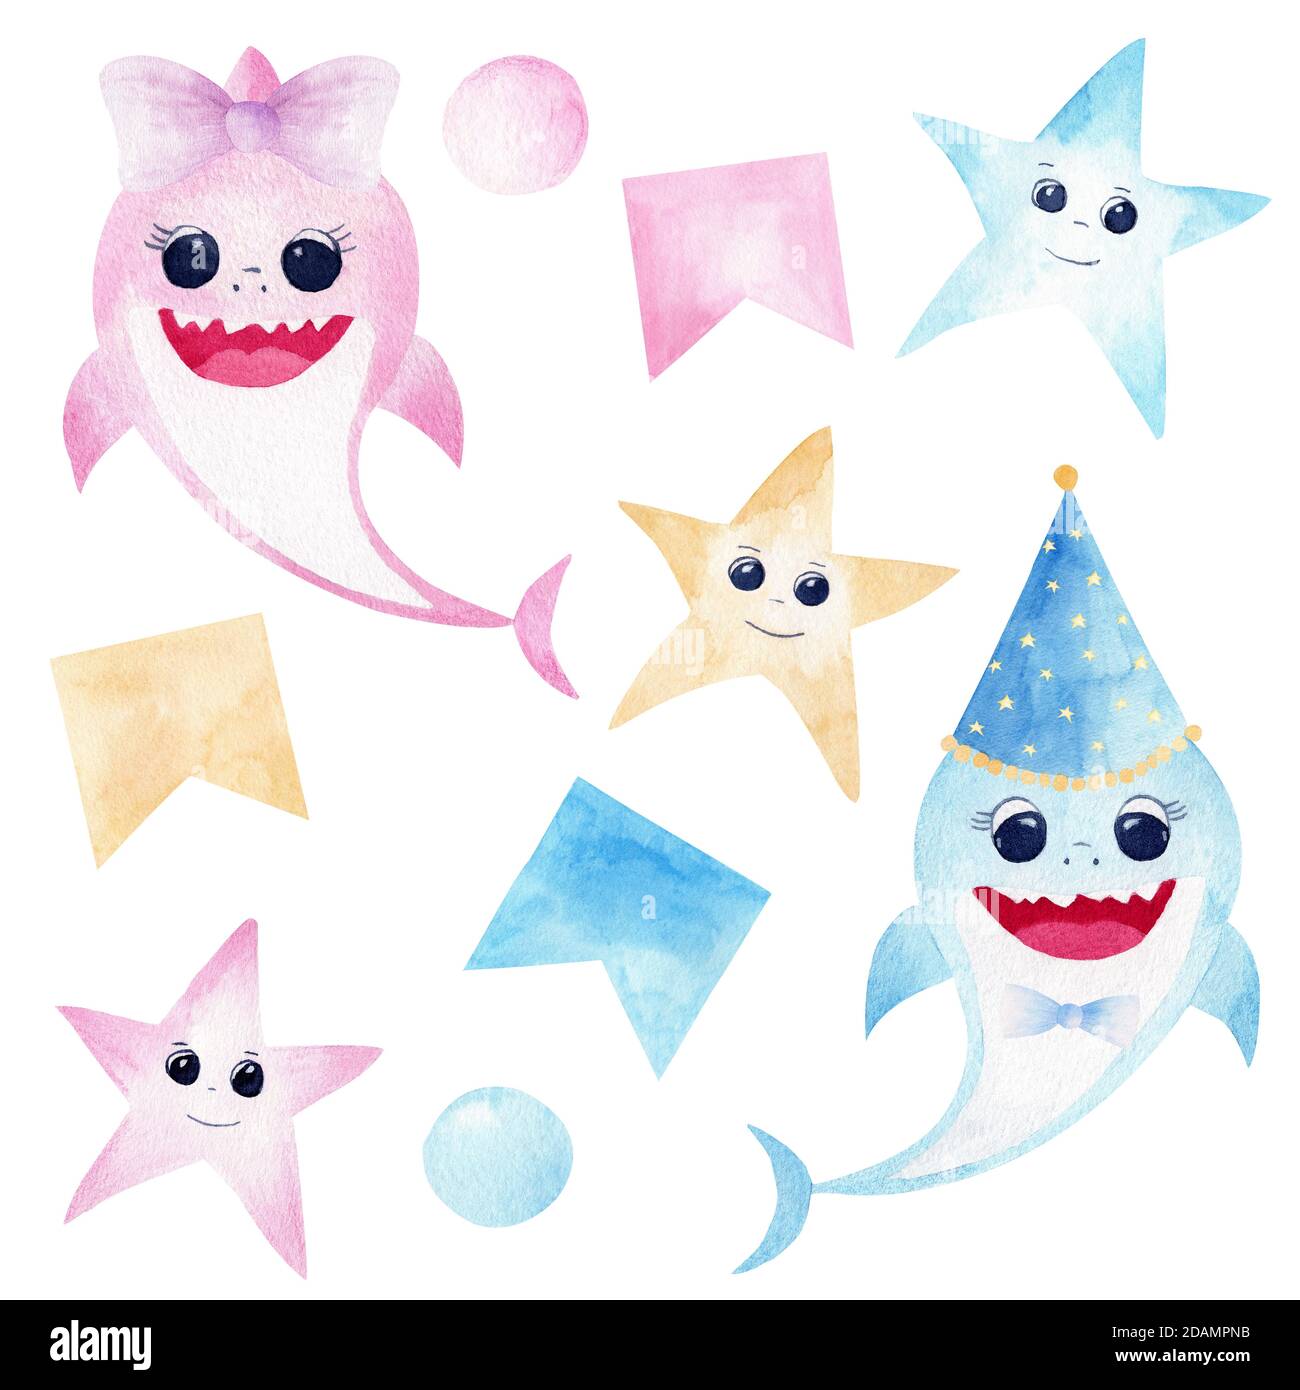 Baby Shark Watercolor Clipart Pink And Blue Smiling Sharks Colorful Starfishes And Party Decorations Isolated On White Background Perfect For Baby Stock Photo Alamy